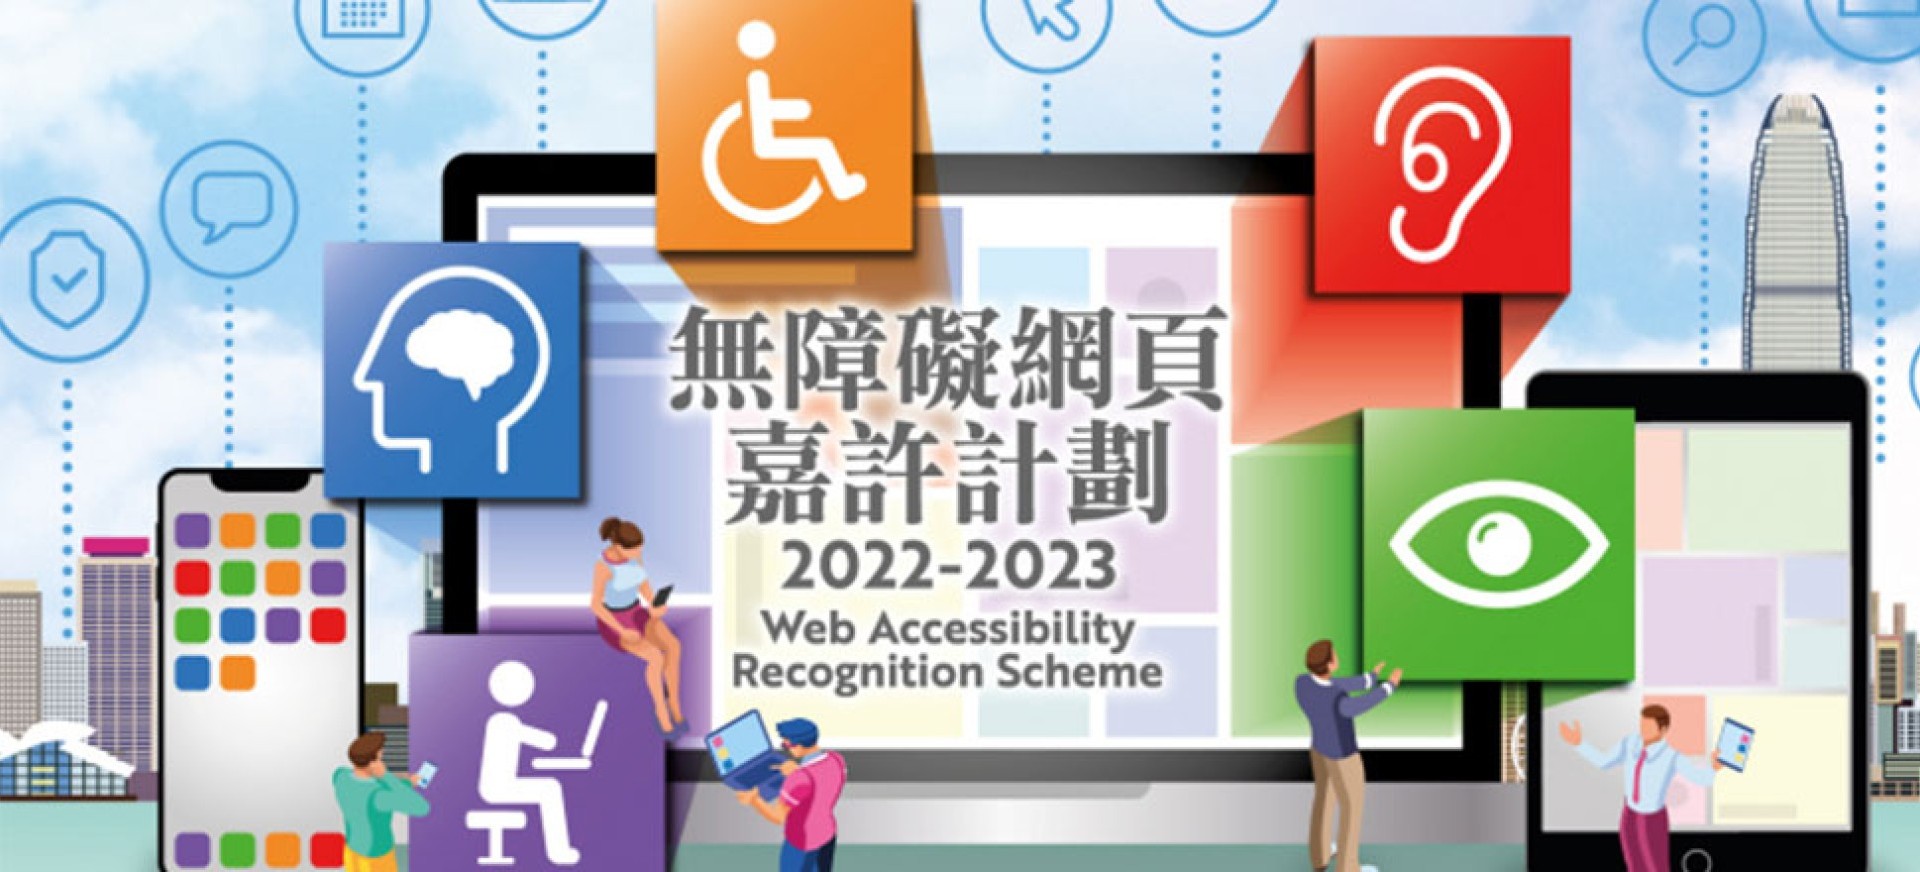 Wins Triple Gold Award in Web Accessibility Recognition Scheme 2022 – 2023